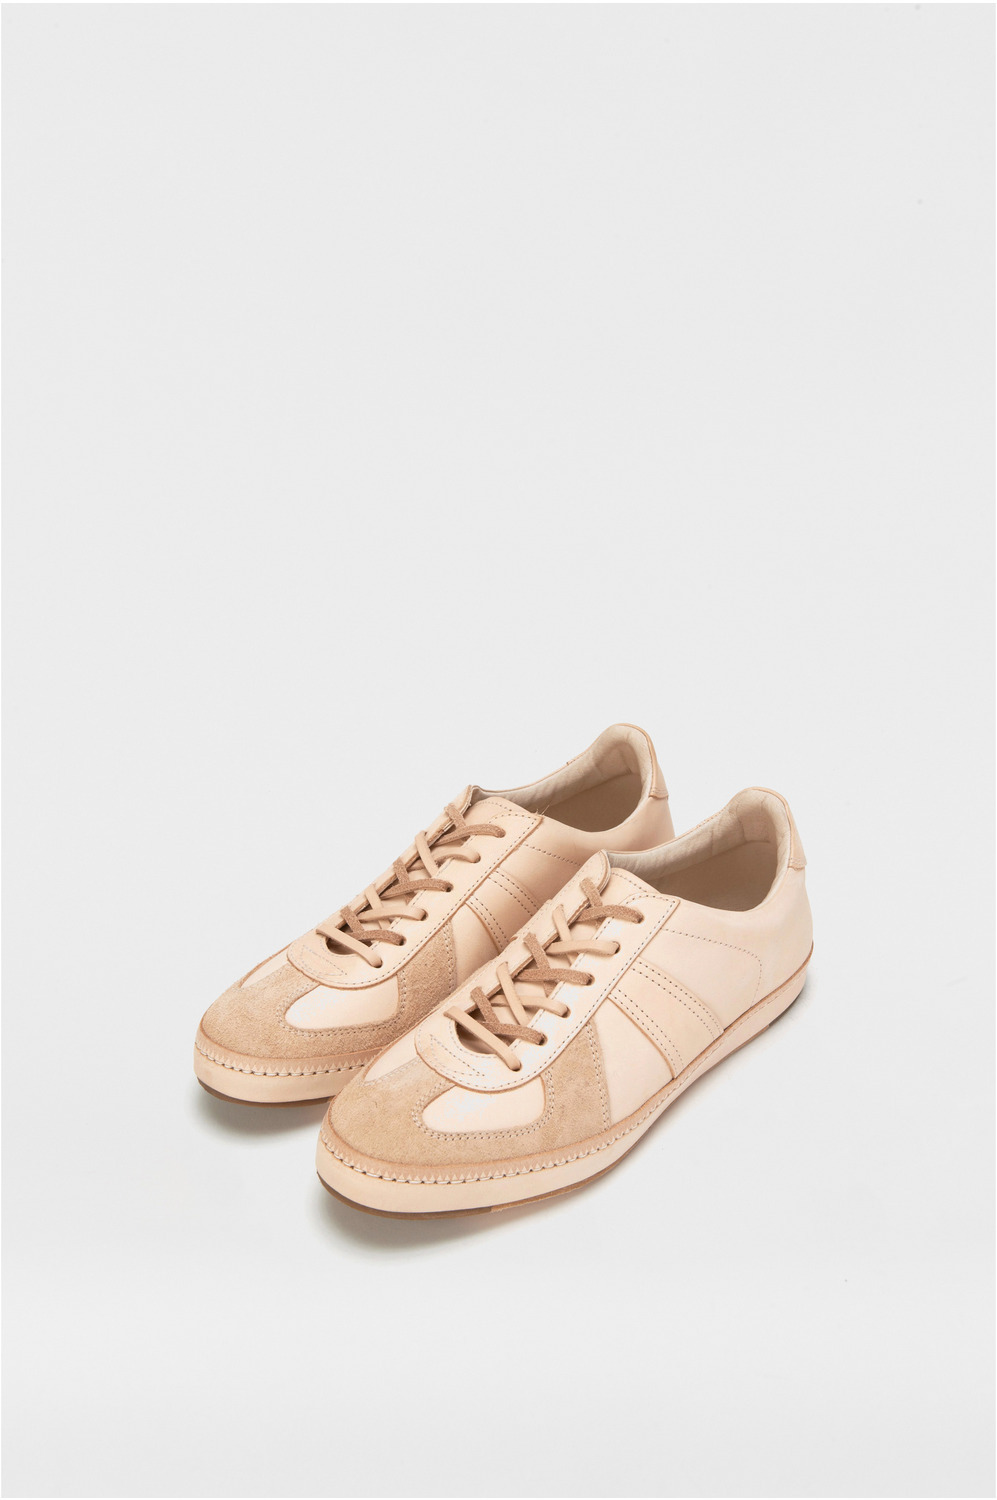 manual industrial products 05｜スキマ Hender Scheme Official Online Shop